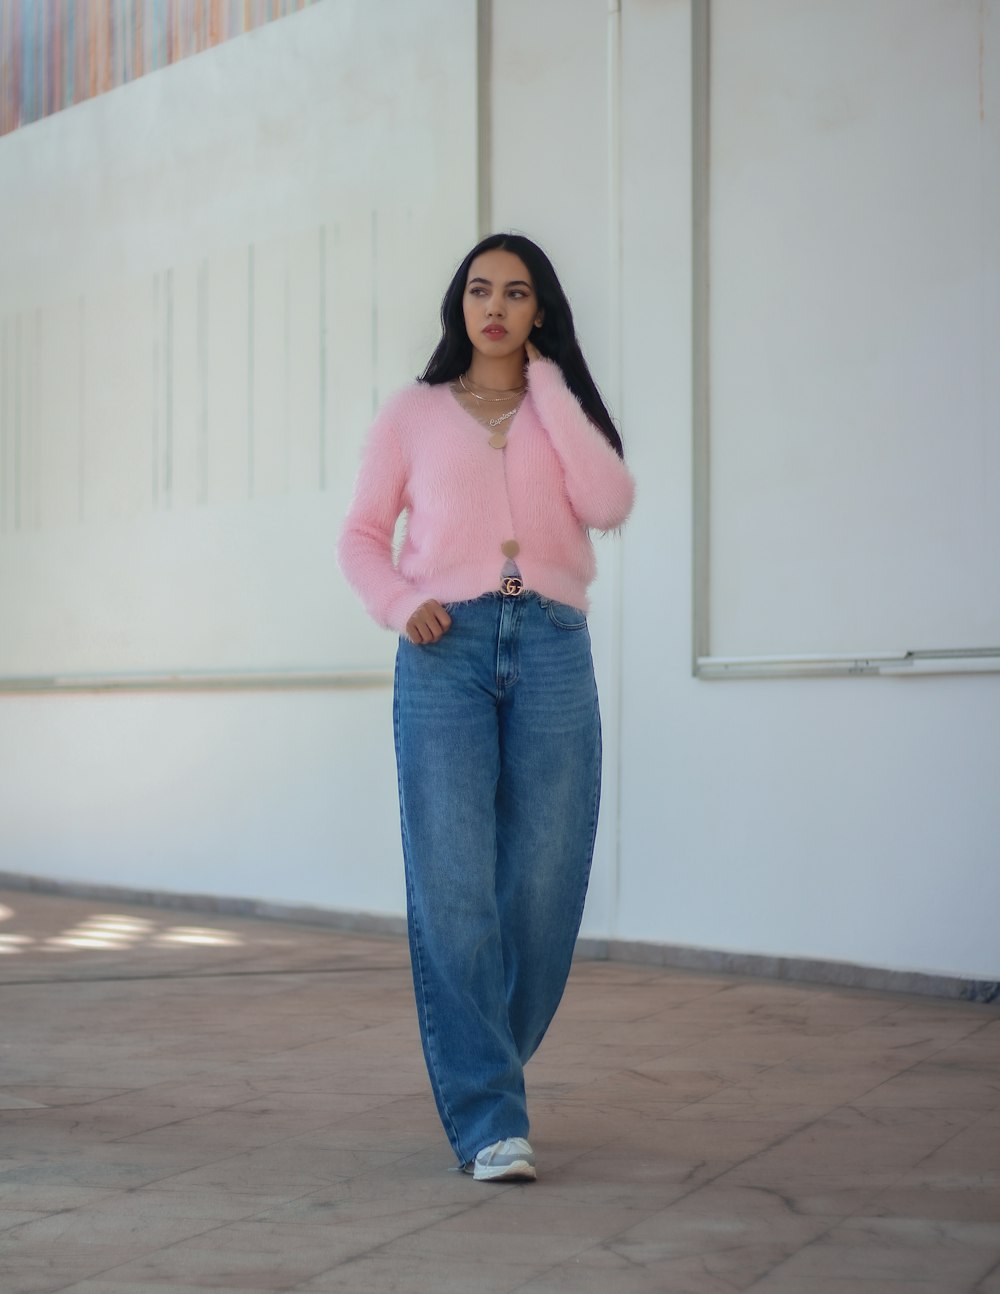 Woman in pink long sleeve shirt and blue denim jeans standing near white  wall photo – Free Maroc Image on Unsplash